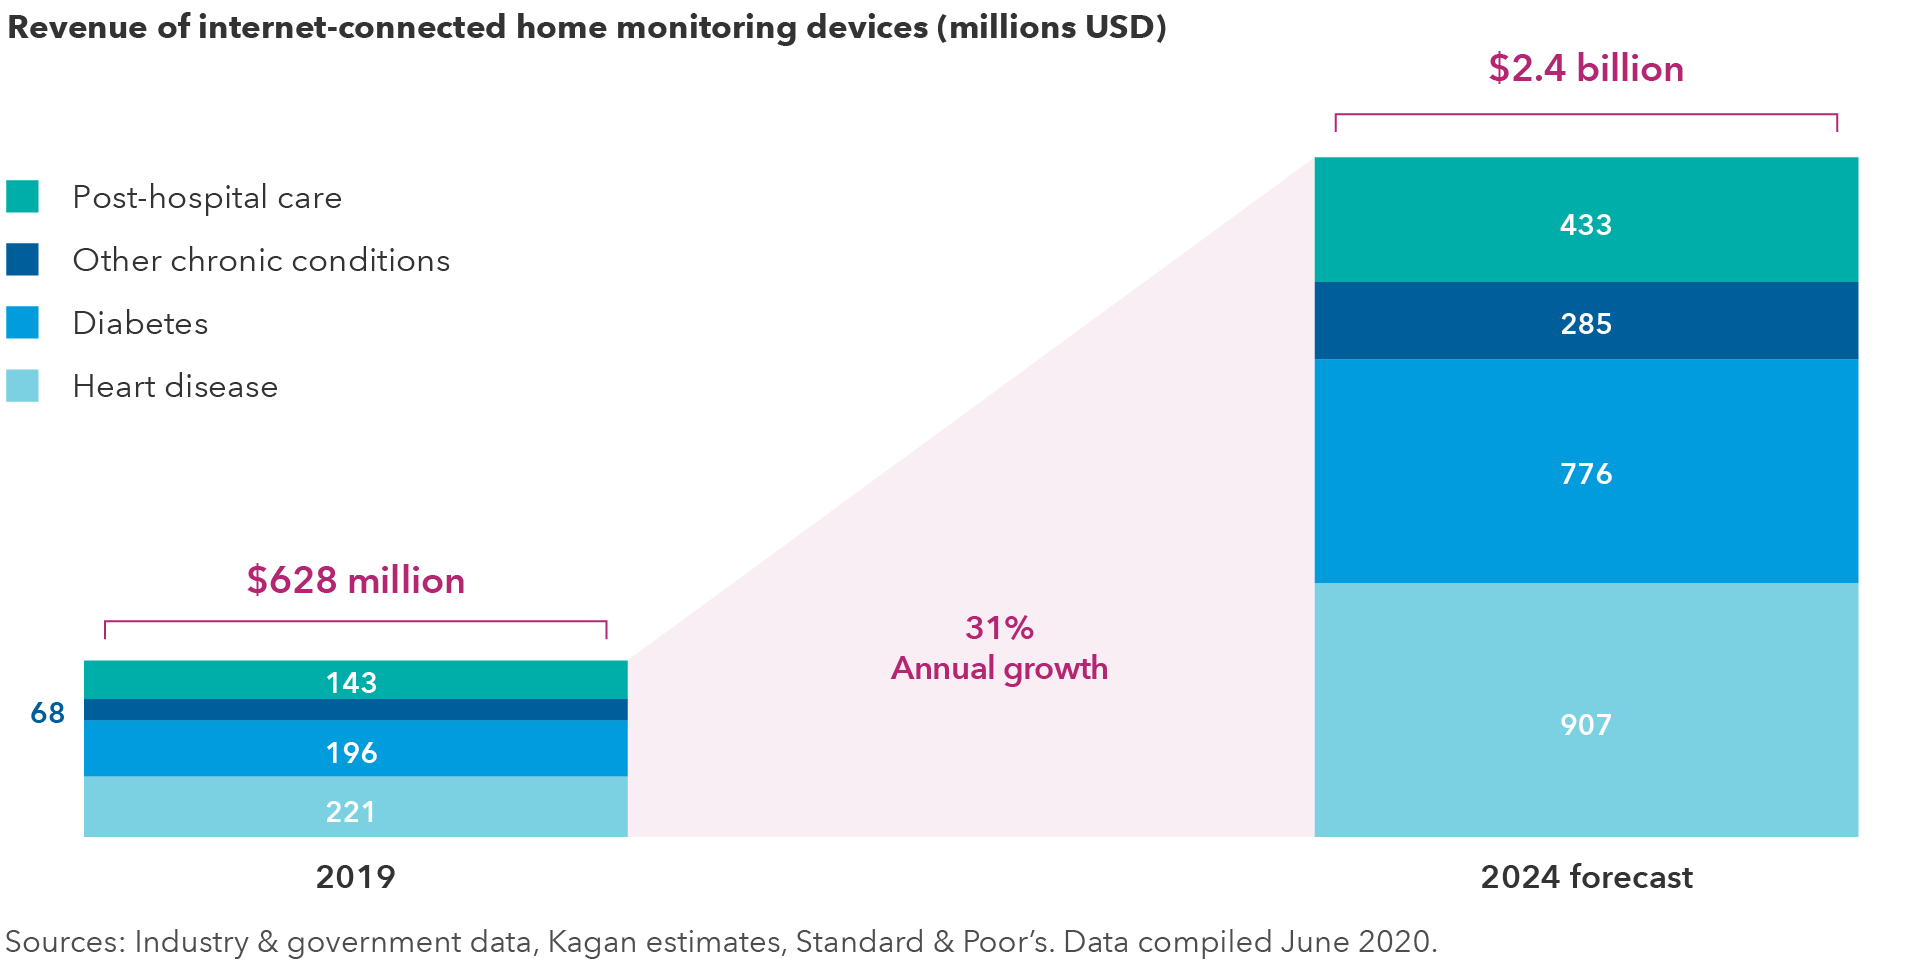 The chart shows projected growth of revenue from internet-connected home monitoring devices for various health conditions from 2019 through 2024. Total revenue is expected to grow 31% annually, from $628 million in 2019 to $2.4 billion in 2024. Revenue growth forecasts for specific categories of devices are as follows: post-hospital care from $143 million to $433 million; diabetes from $196 million to $776 million; heart disease from $221 million to $907 million; other chronic conditions from $68 million to $285 million. Sources: Industry and government data, Kagan Estimates, Standard & Poor’s. Data as of June 2020.